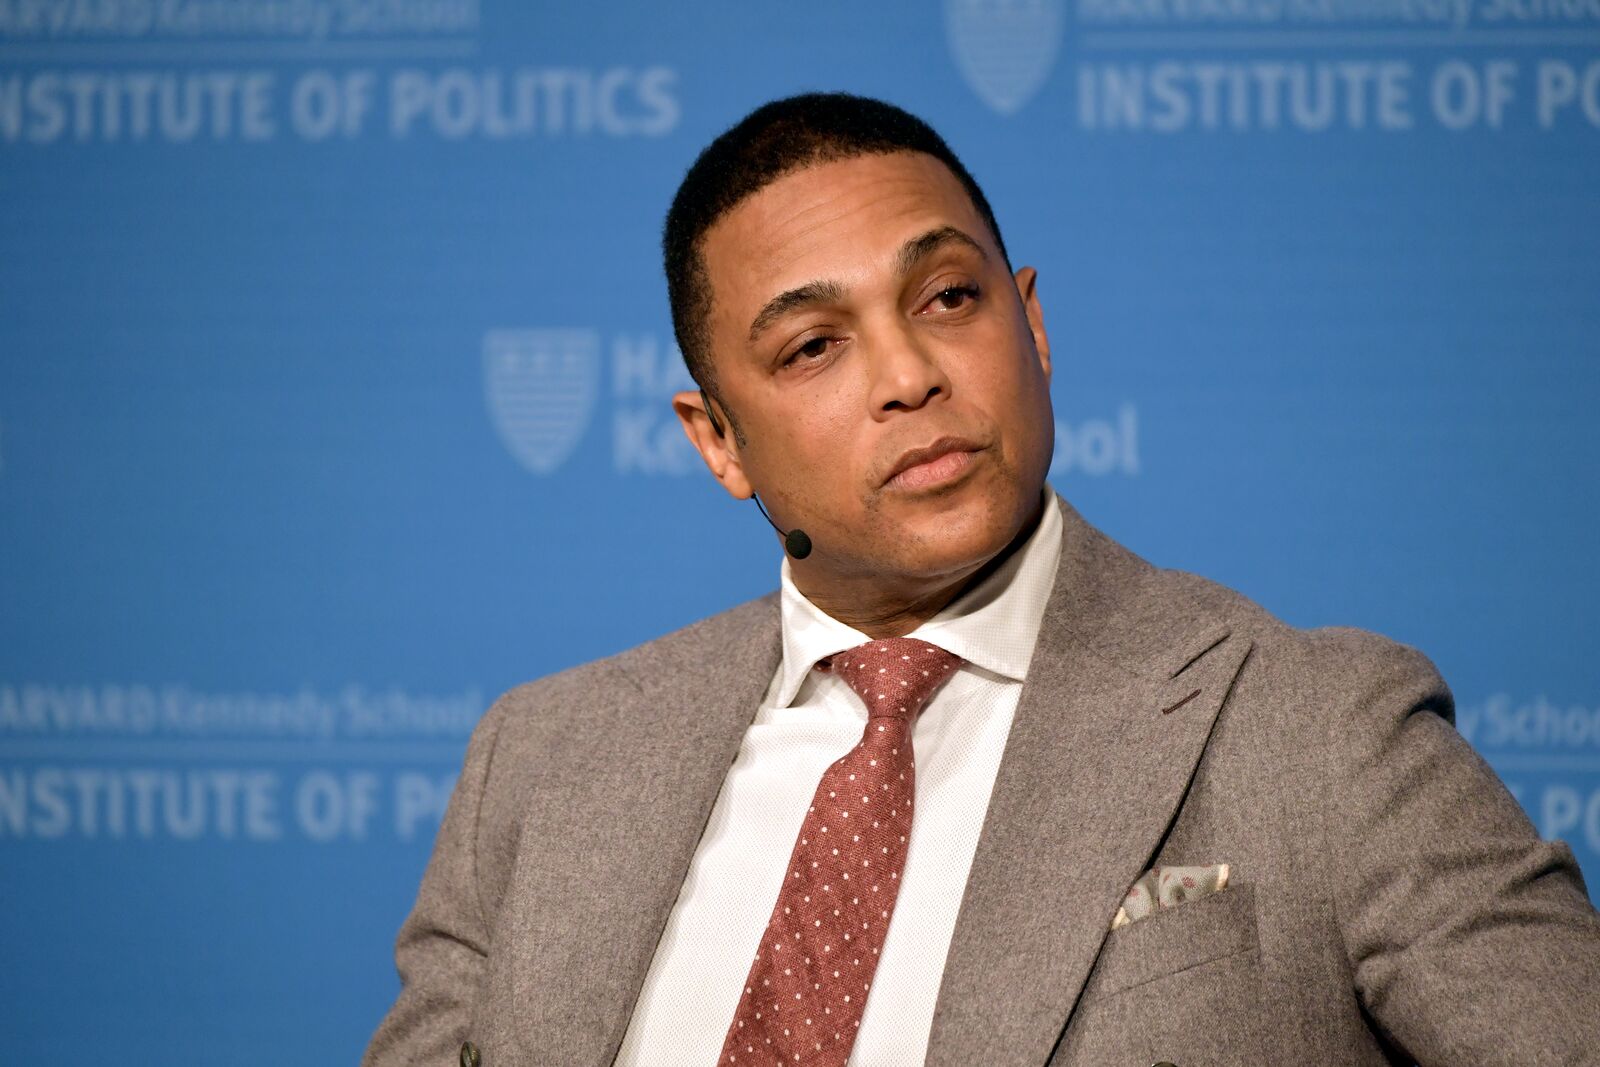 Veteran news anchor Don Lemon speaks at Harvard University Kennedy School of Government Institute of Politics in February 2019. | Photo: Getty Images